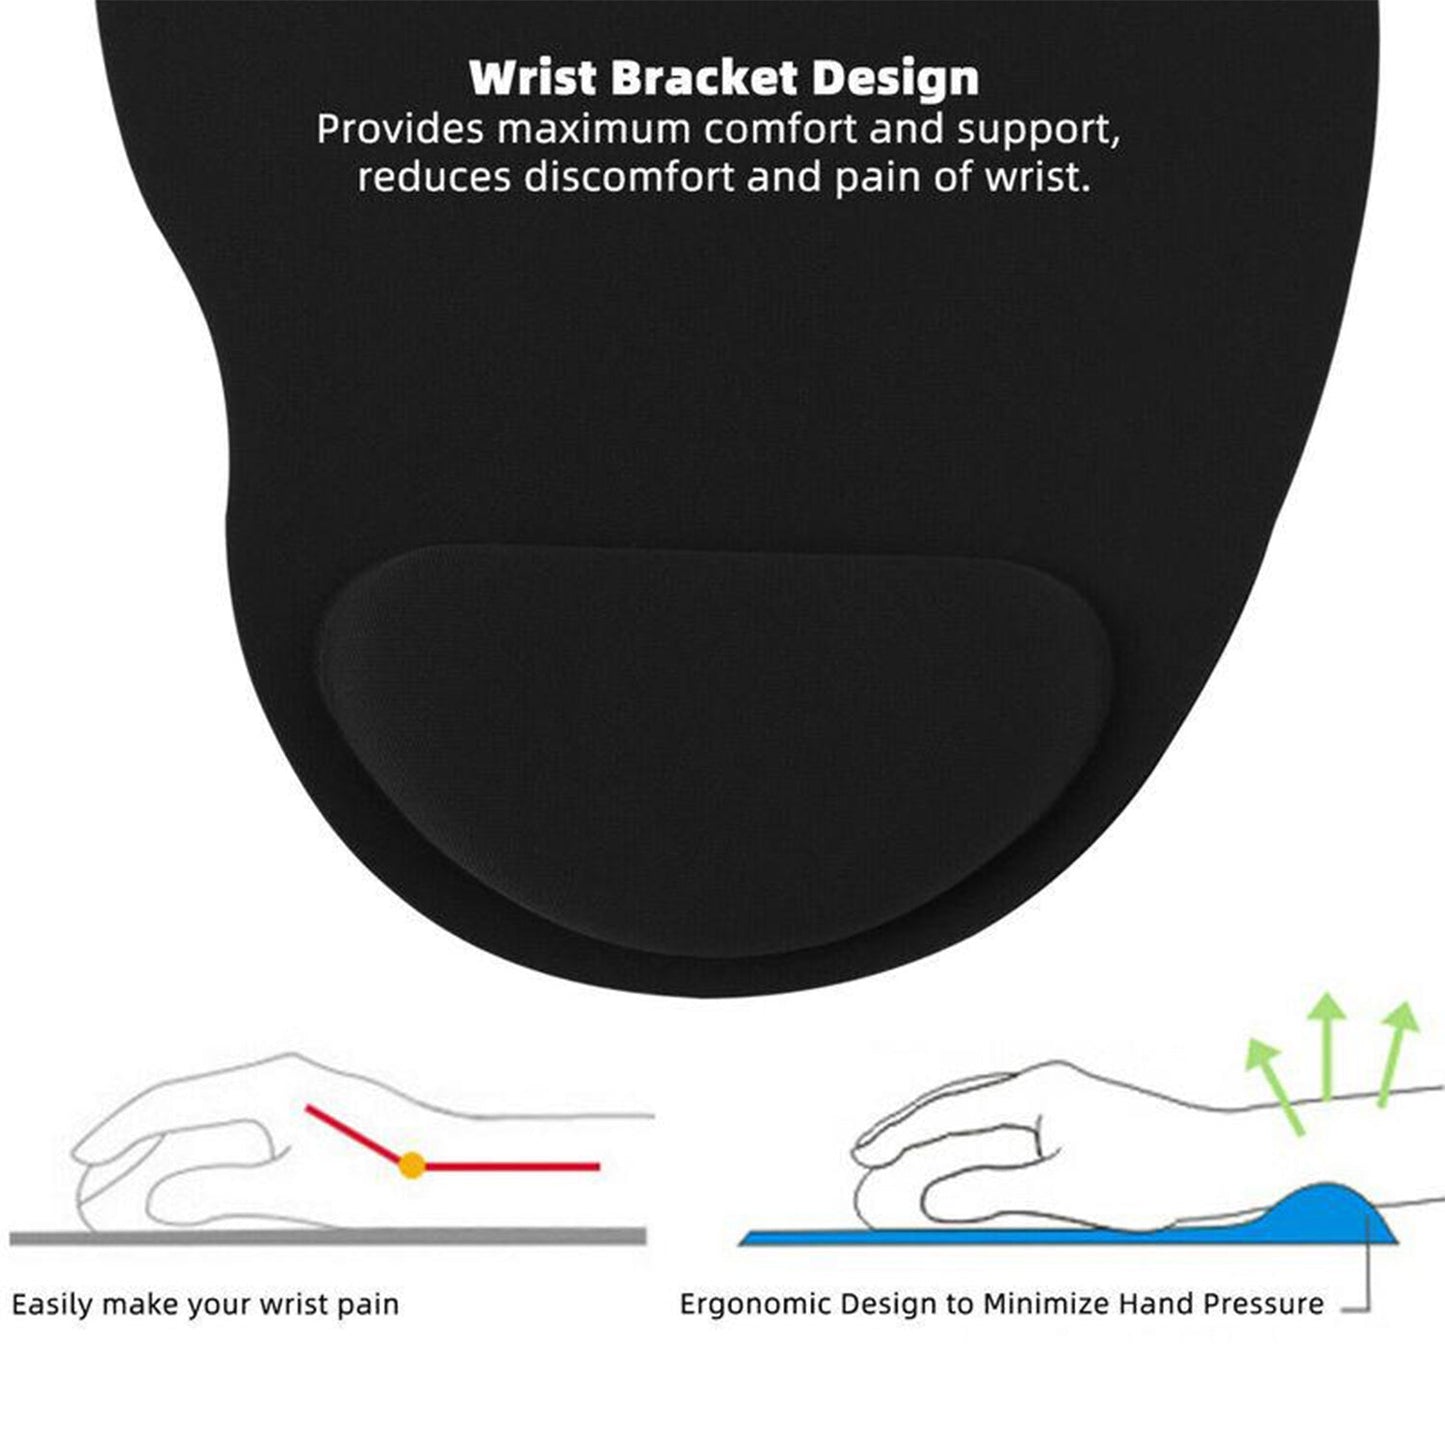 6161 Wrist S Mouse Pad Used For Mouse While Using Computer. DeoDap